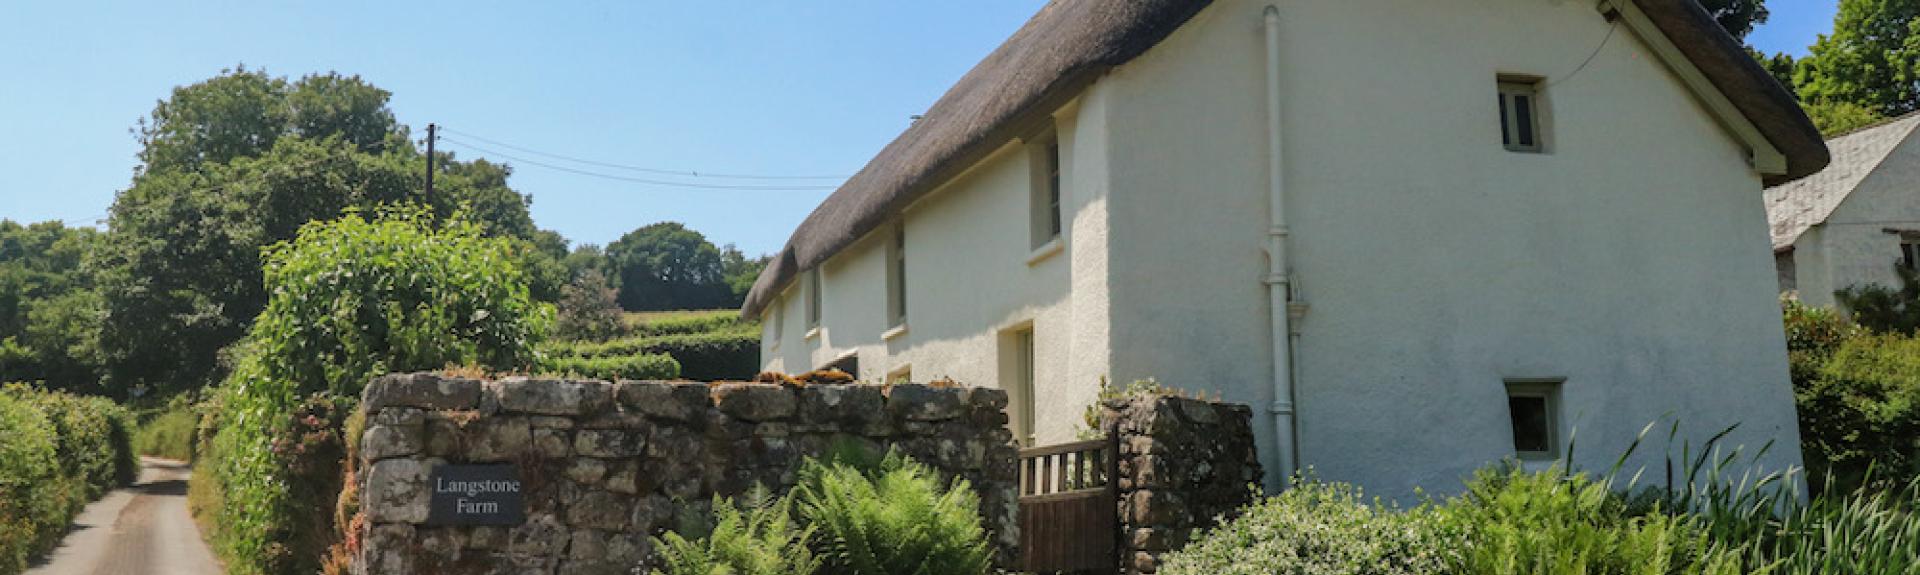 Exterior of a large thatched Dartmoor farmhouse amidst mature gardens